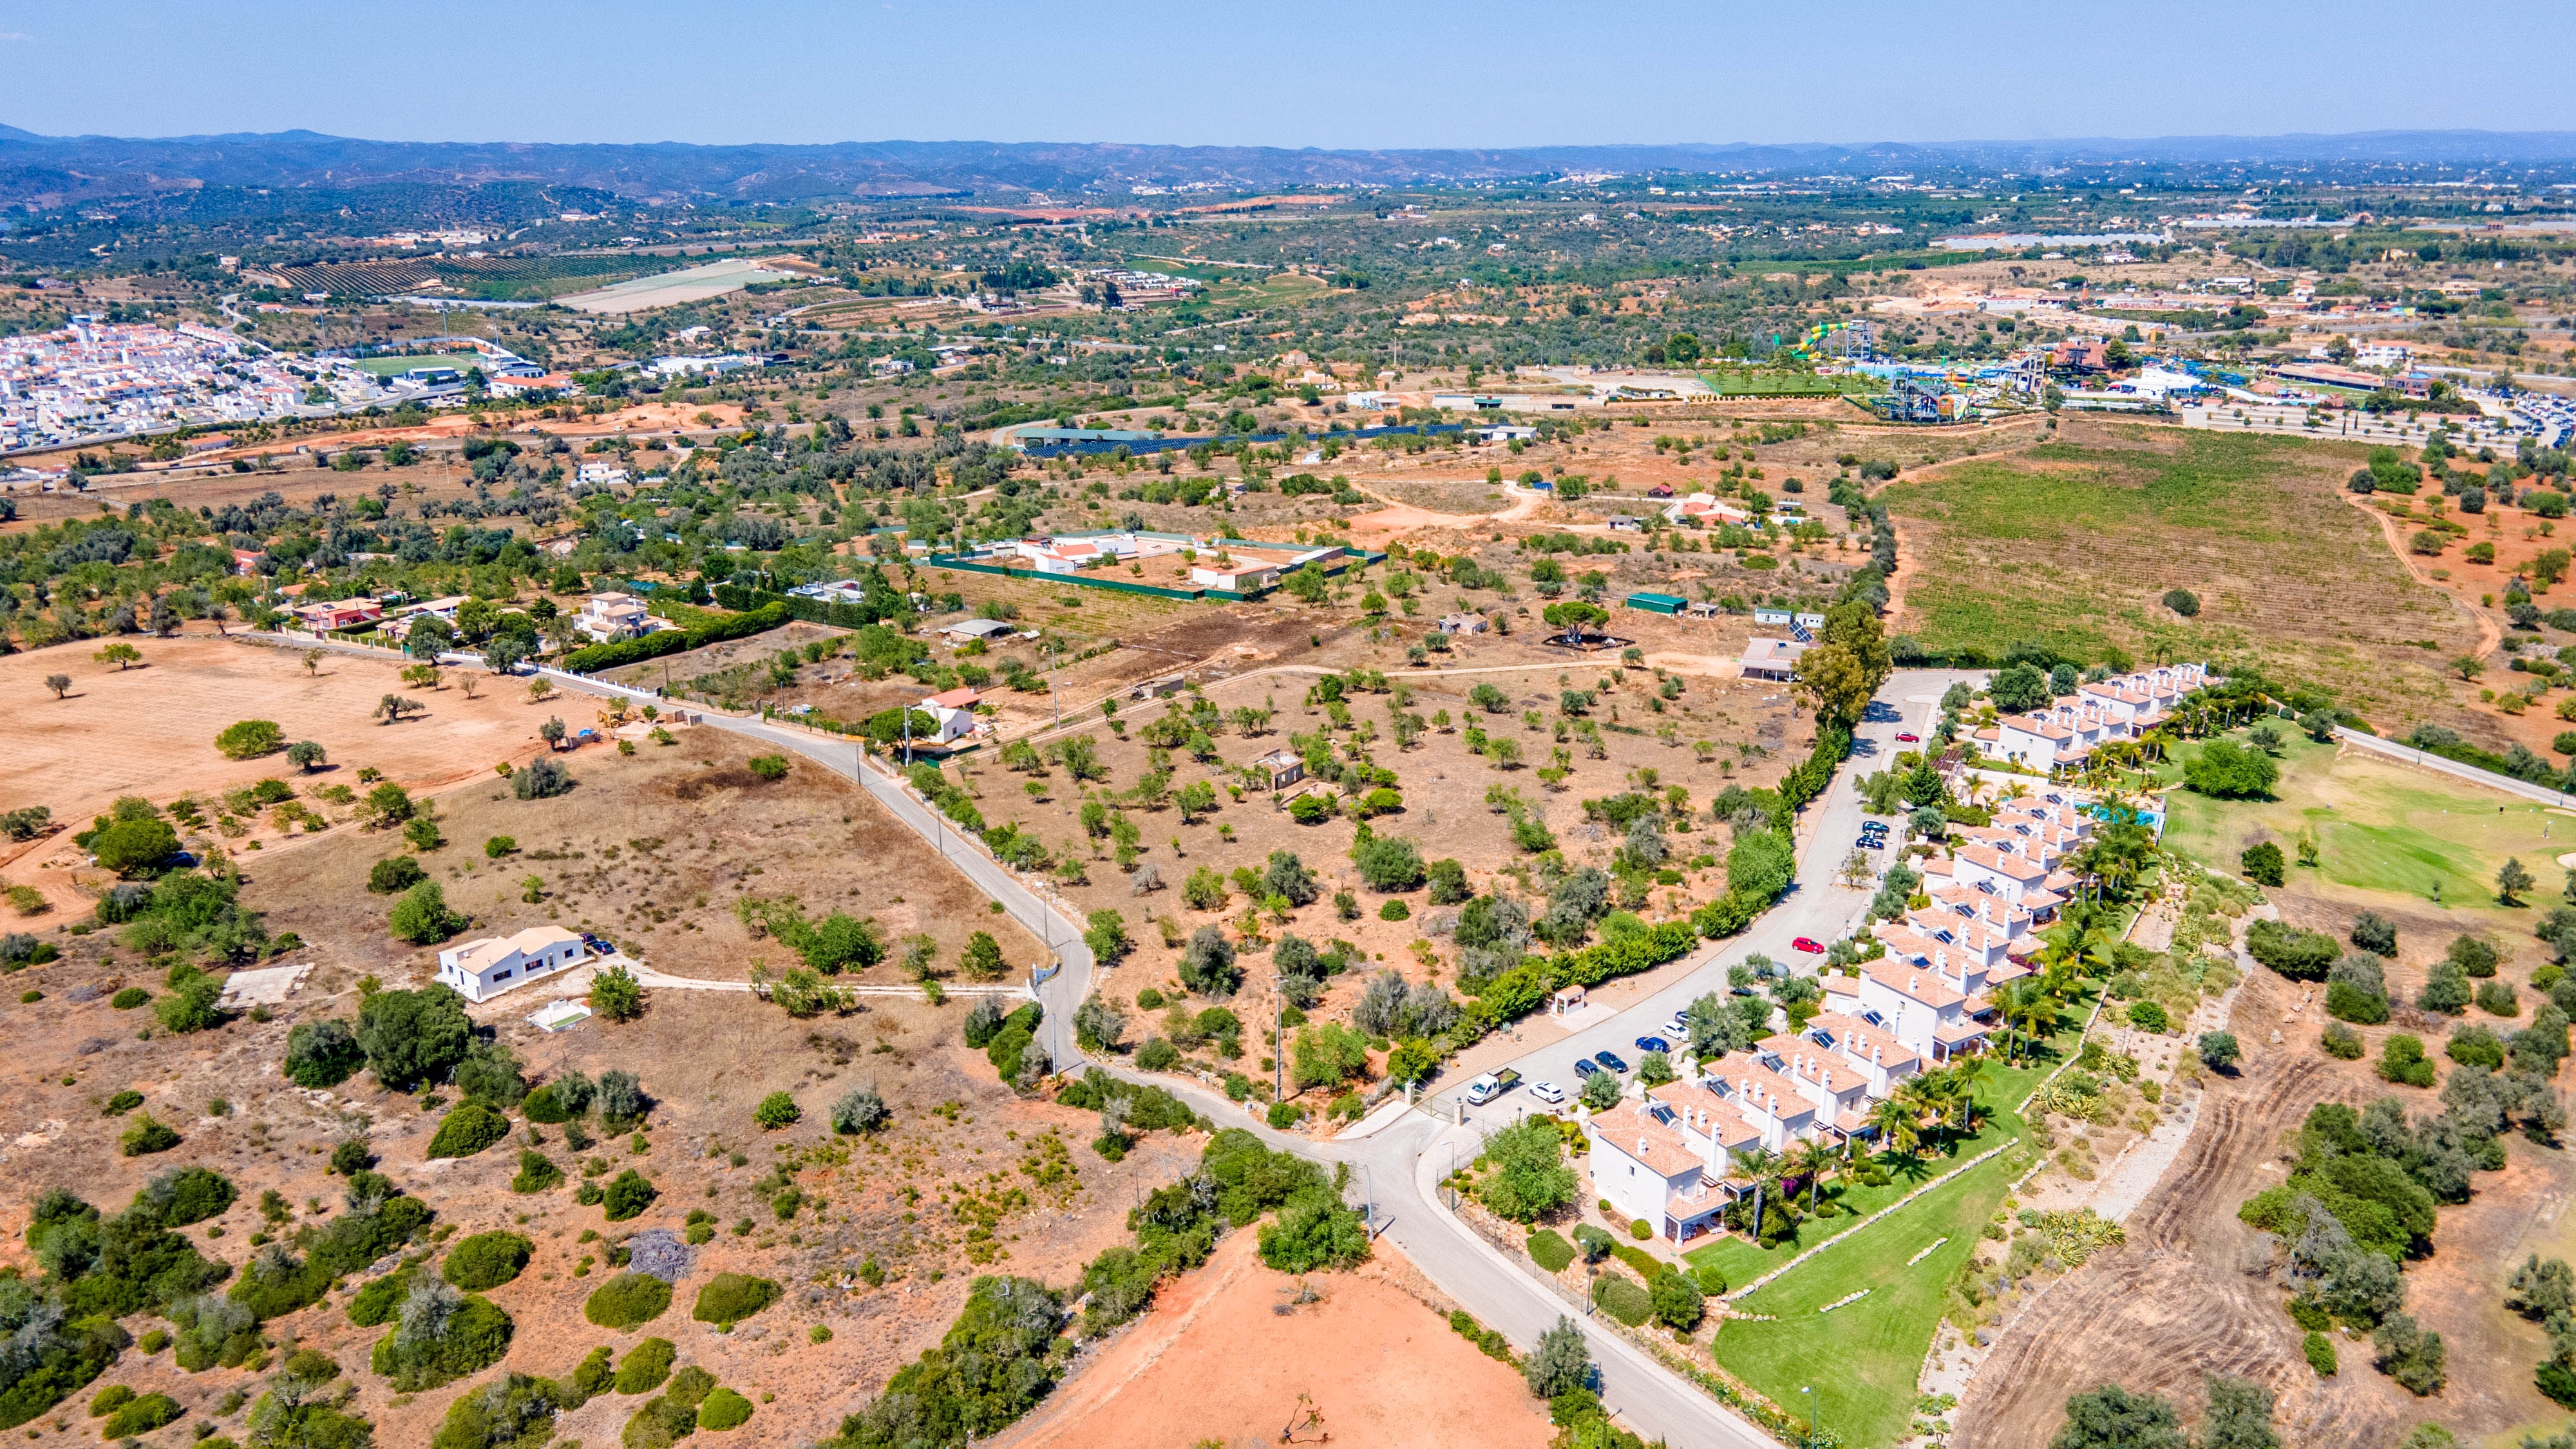 Plot of land with a planning permission for 18 properties, Lagoa, West Algarve | PPP2228 Superb location close to the prestigious golf academy of Vale de Pinta and access to all amenities.